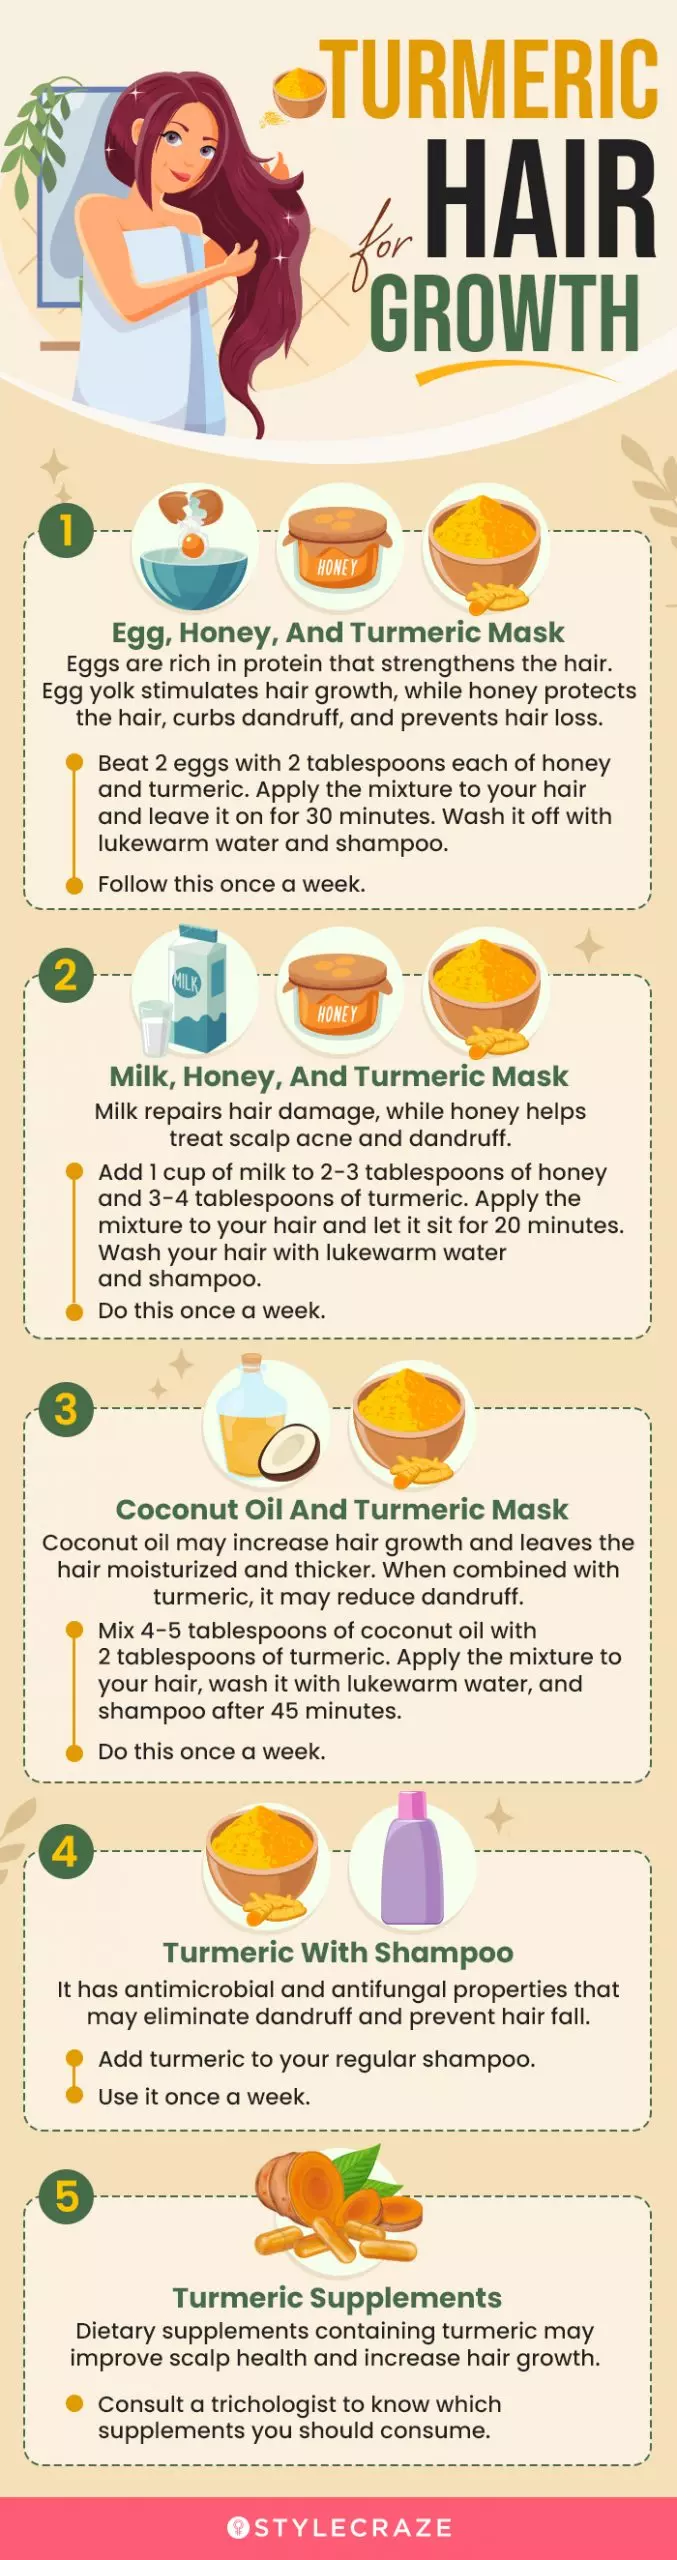 turmeric for hair growth (infographic)